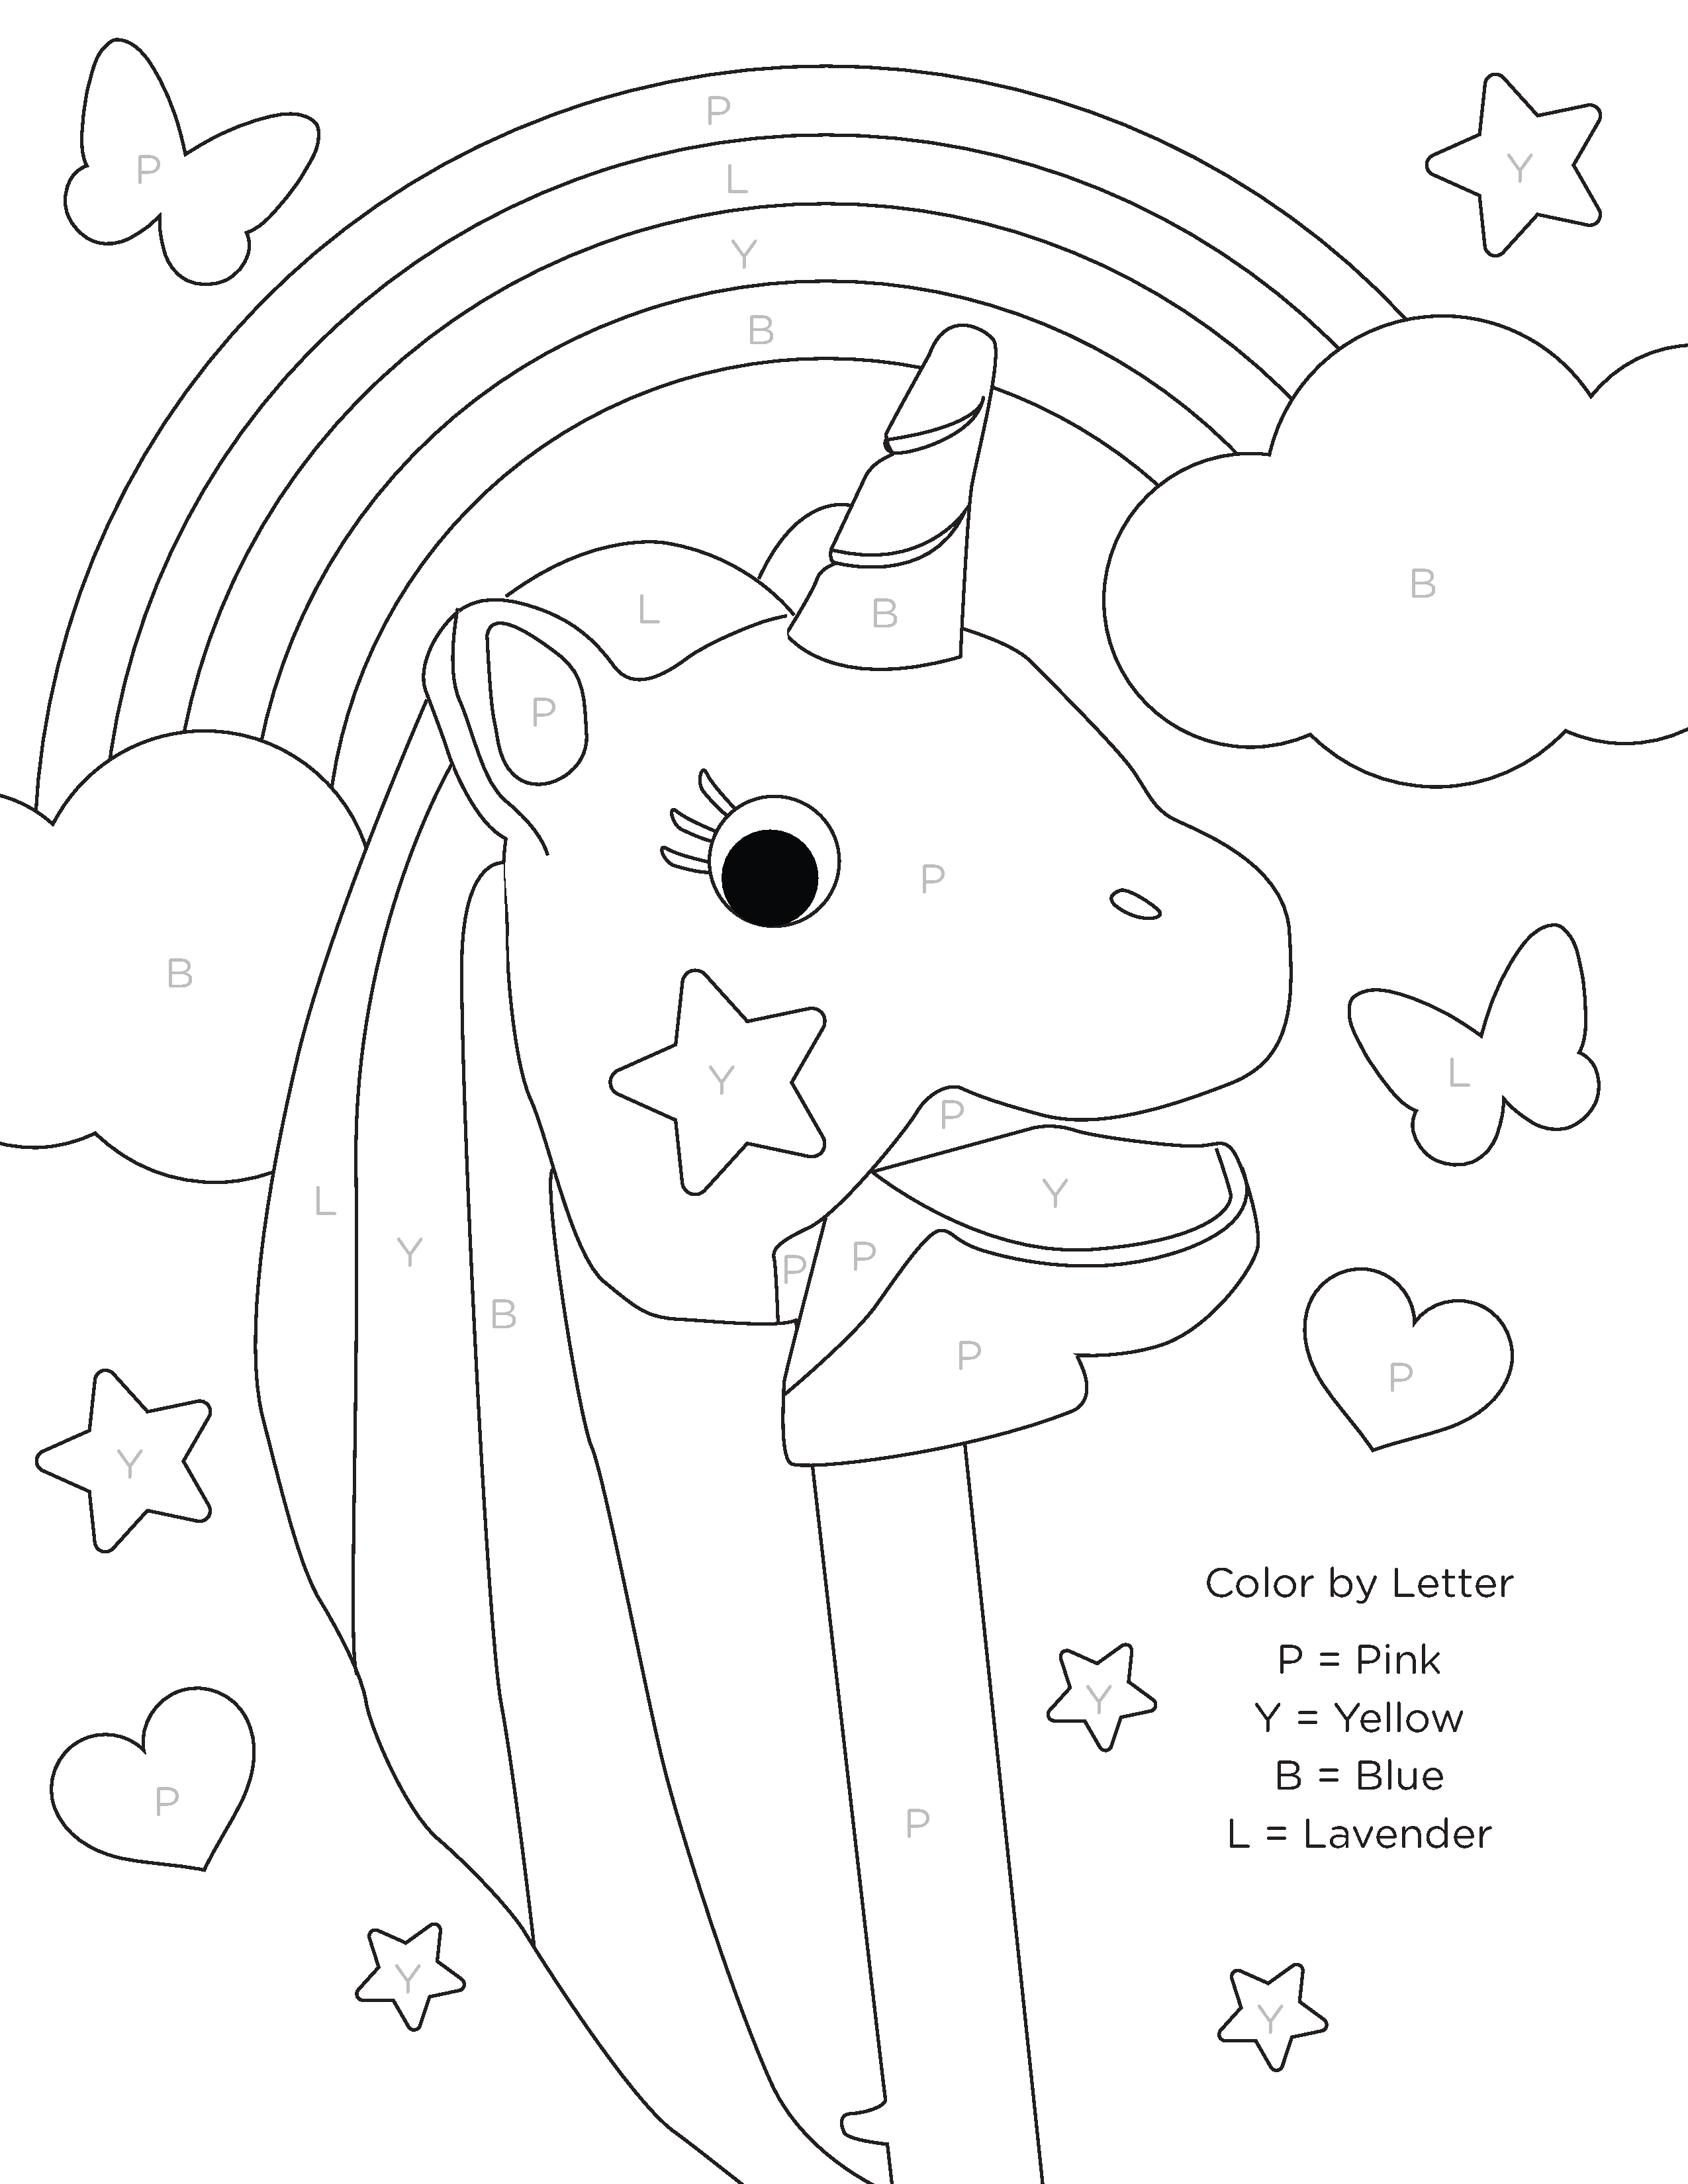 Coloring : Marvelous Colors Coloring Pages Image Ideas Coat Of Many Colors  Dolly Parton‚ Primary Colors Coloring Pages For Toddlers‚ Learn Your Colors  Coloring Pages along with Colorings